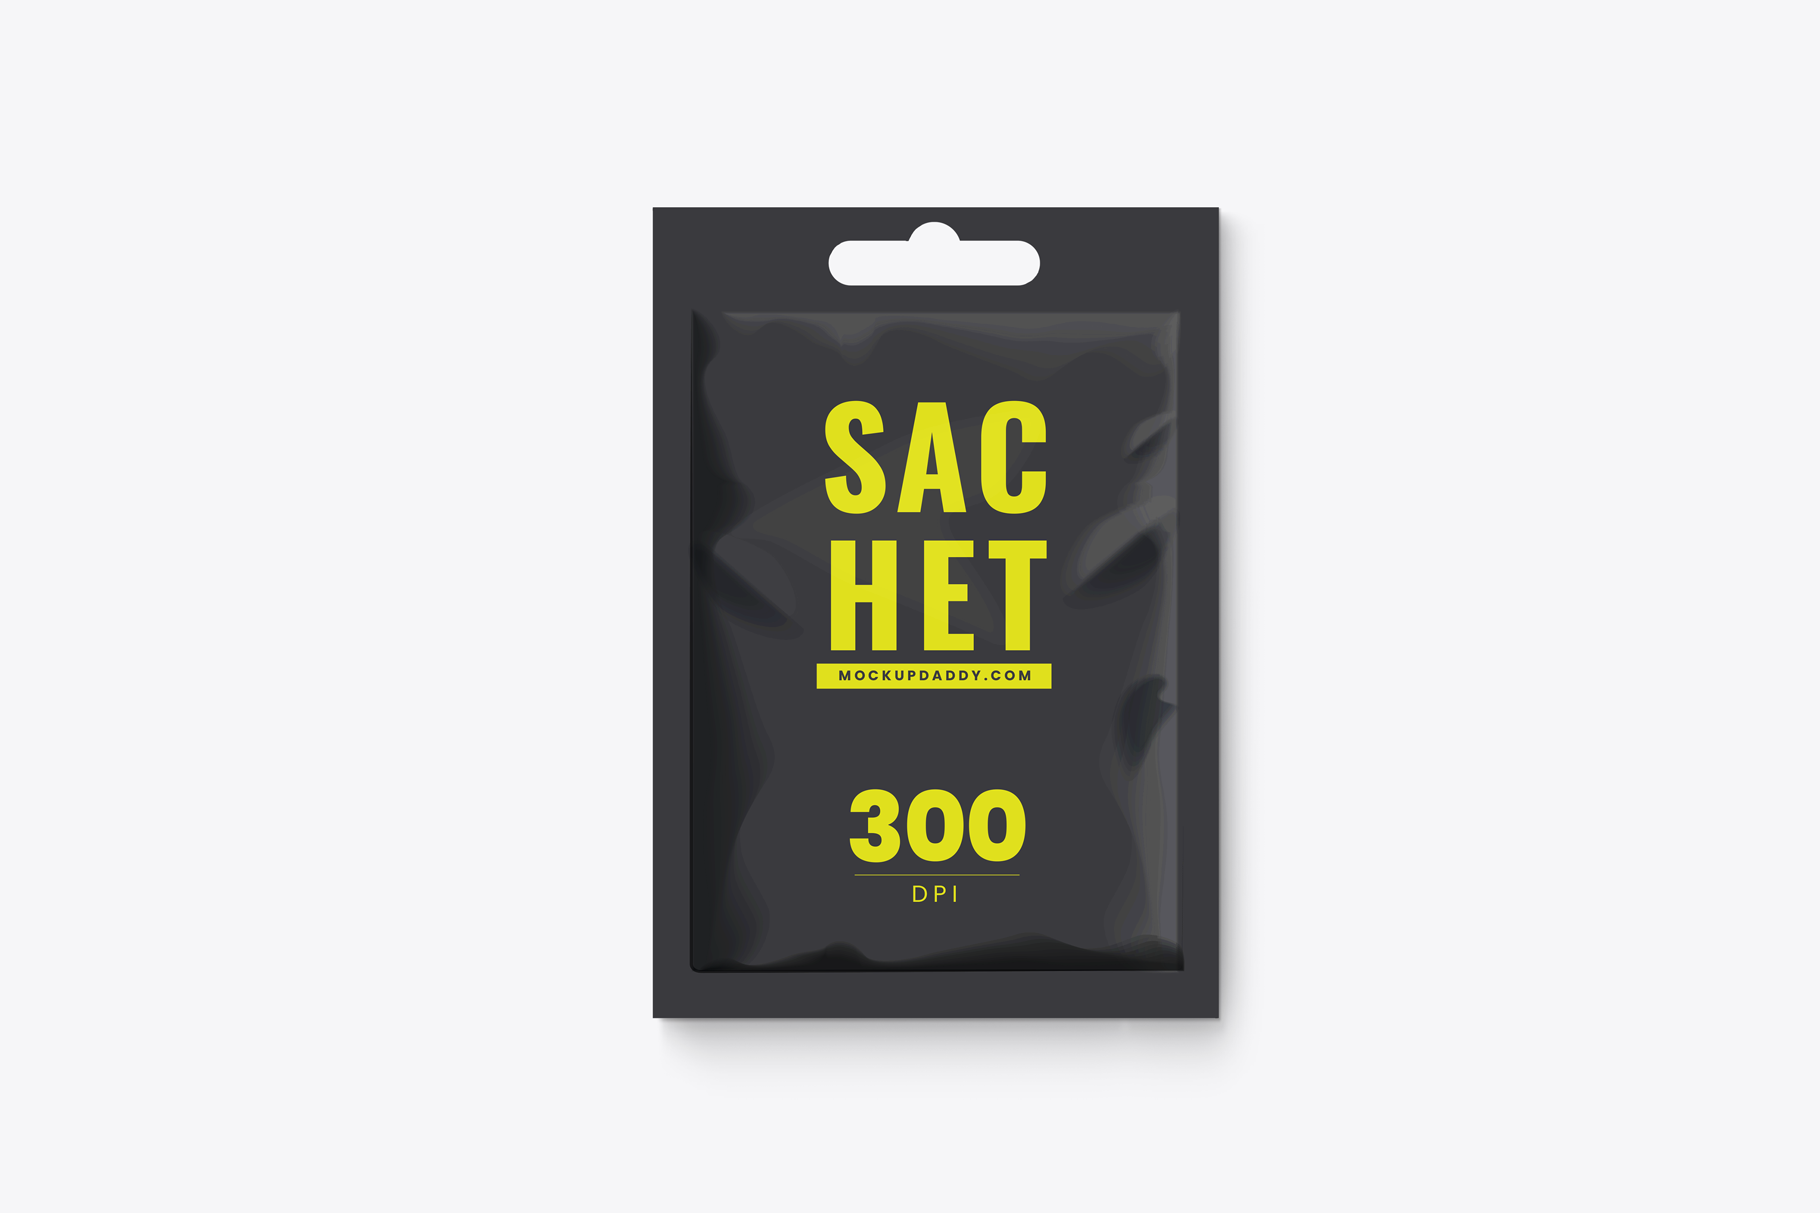 Sachet with Hanger PSD Packaging Mockup in black color with yellow text.